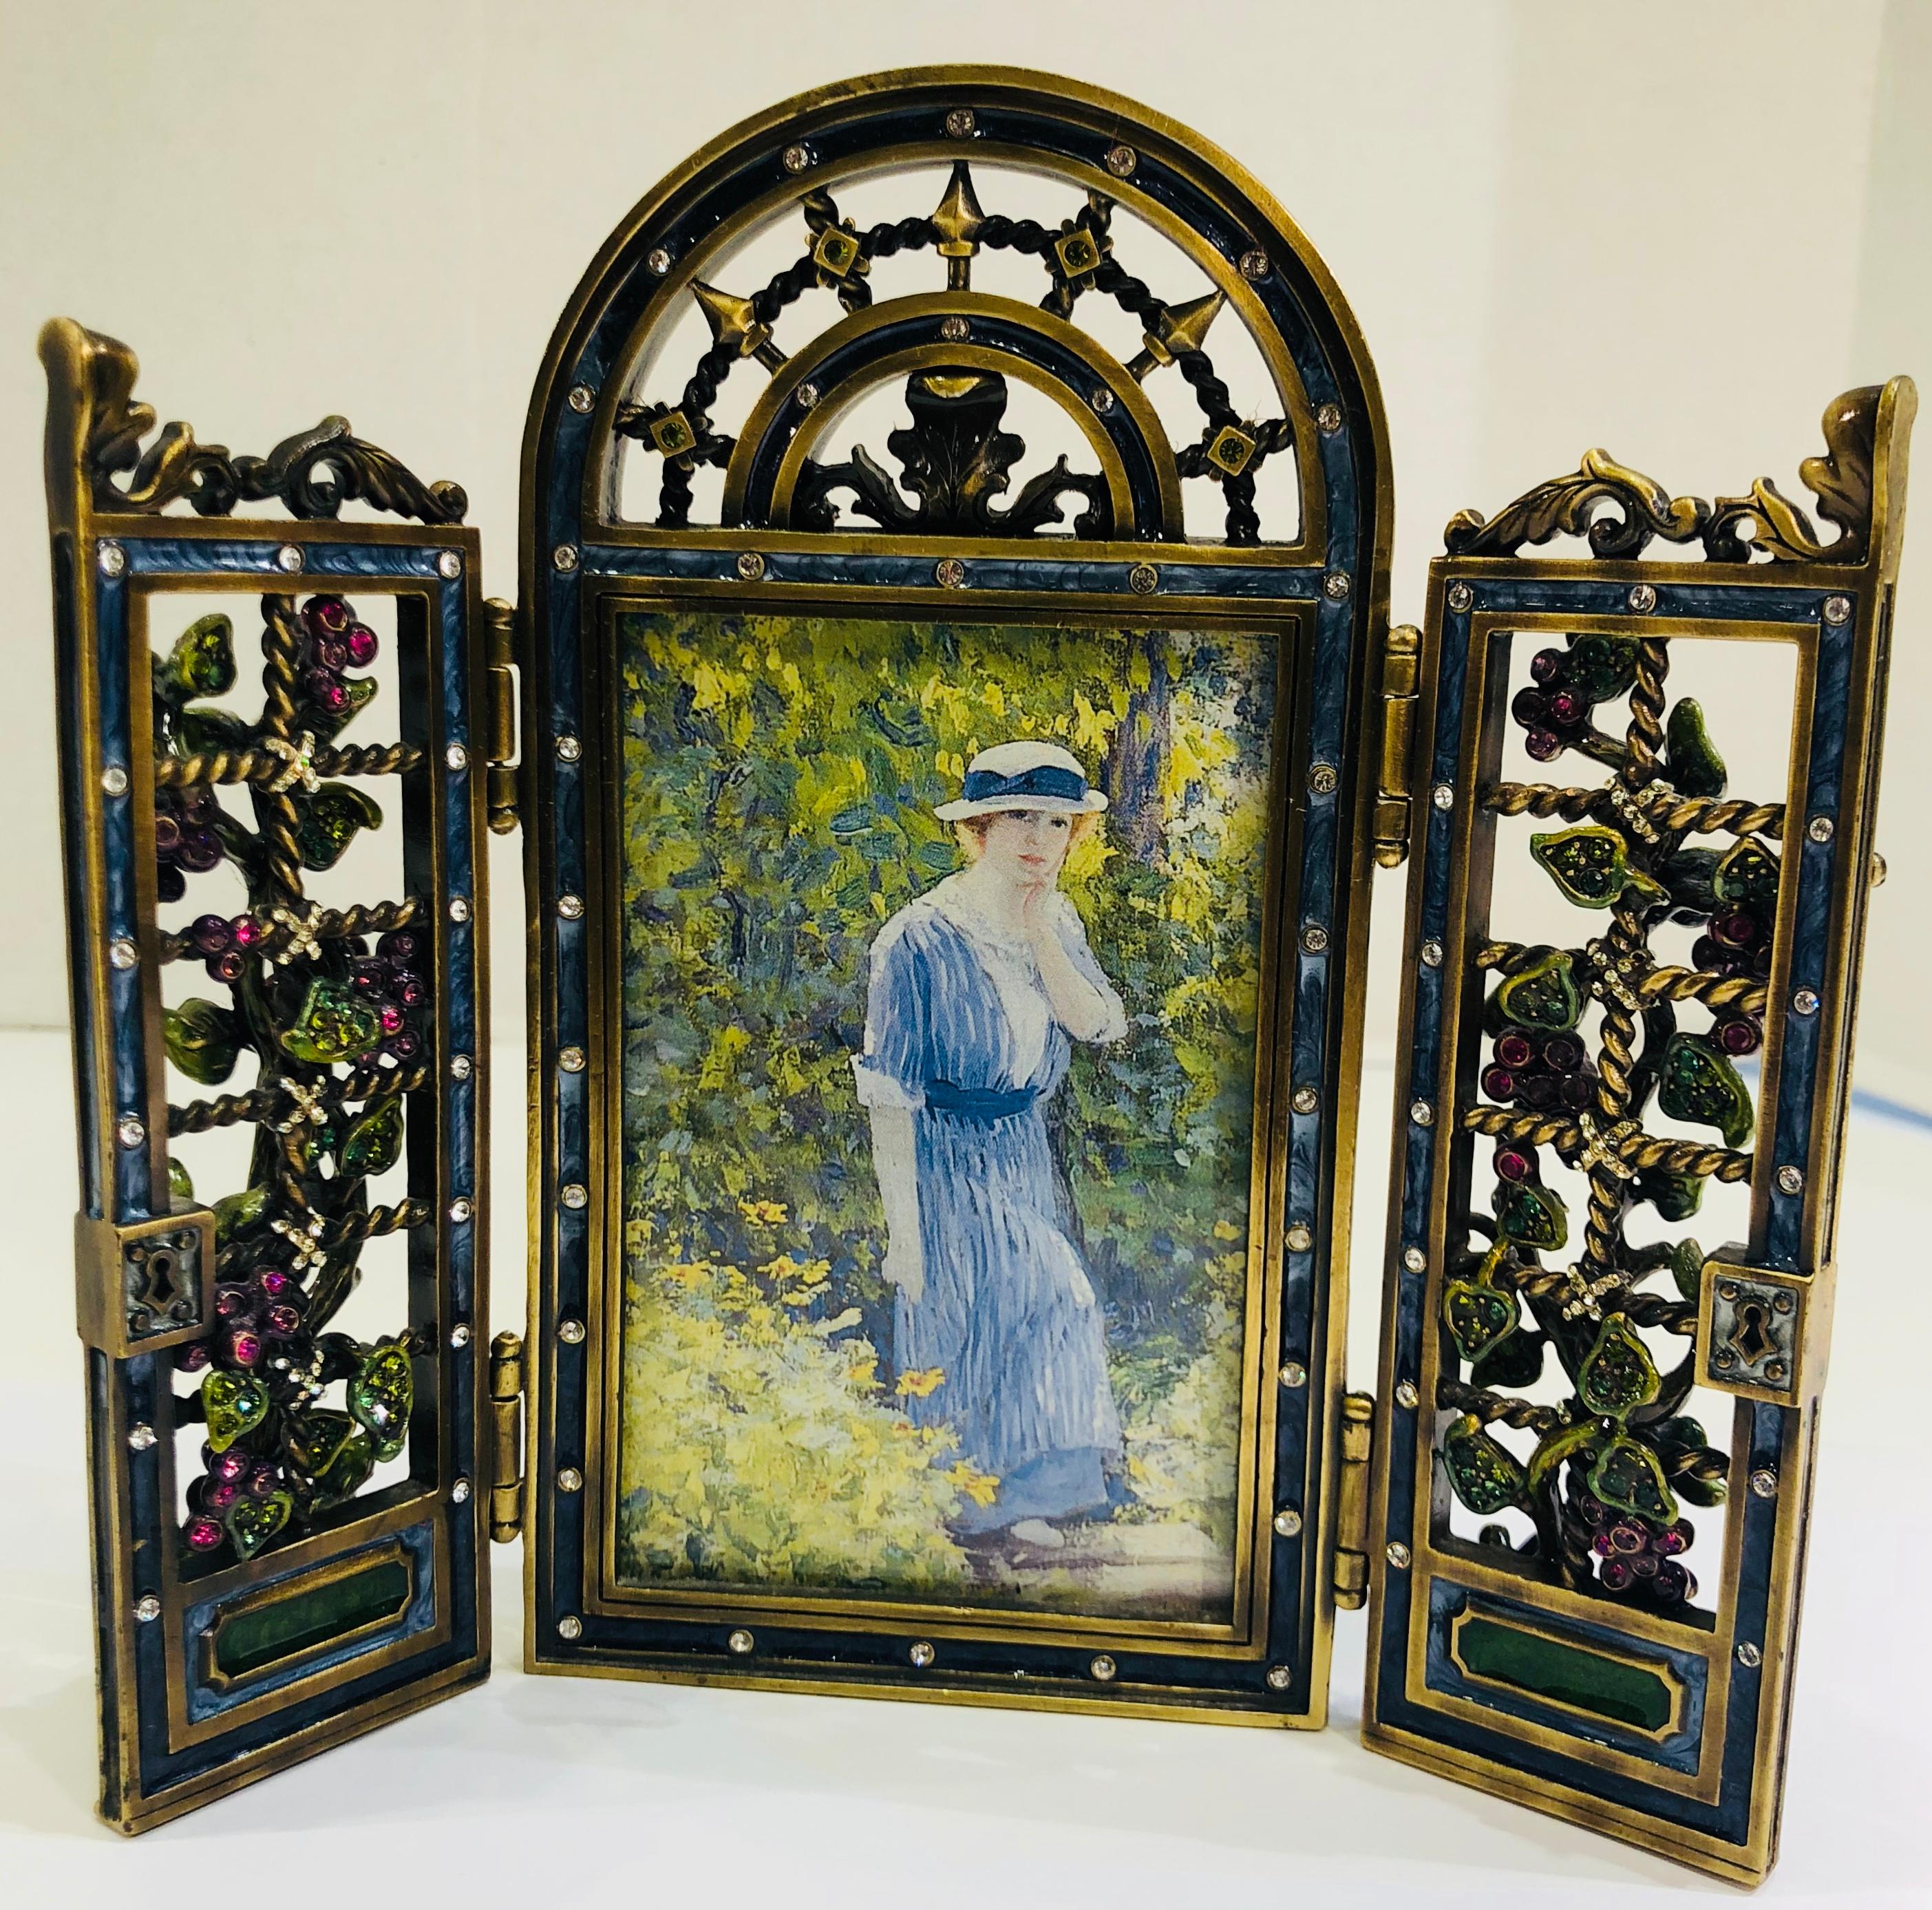 Rare, hard-to-find, estate, retired designer, Jay Strongwater English Garden motif picture frame holds a 3